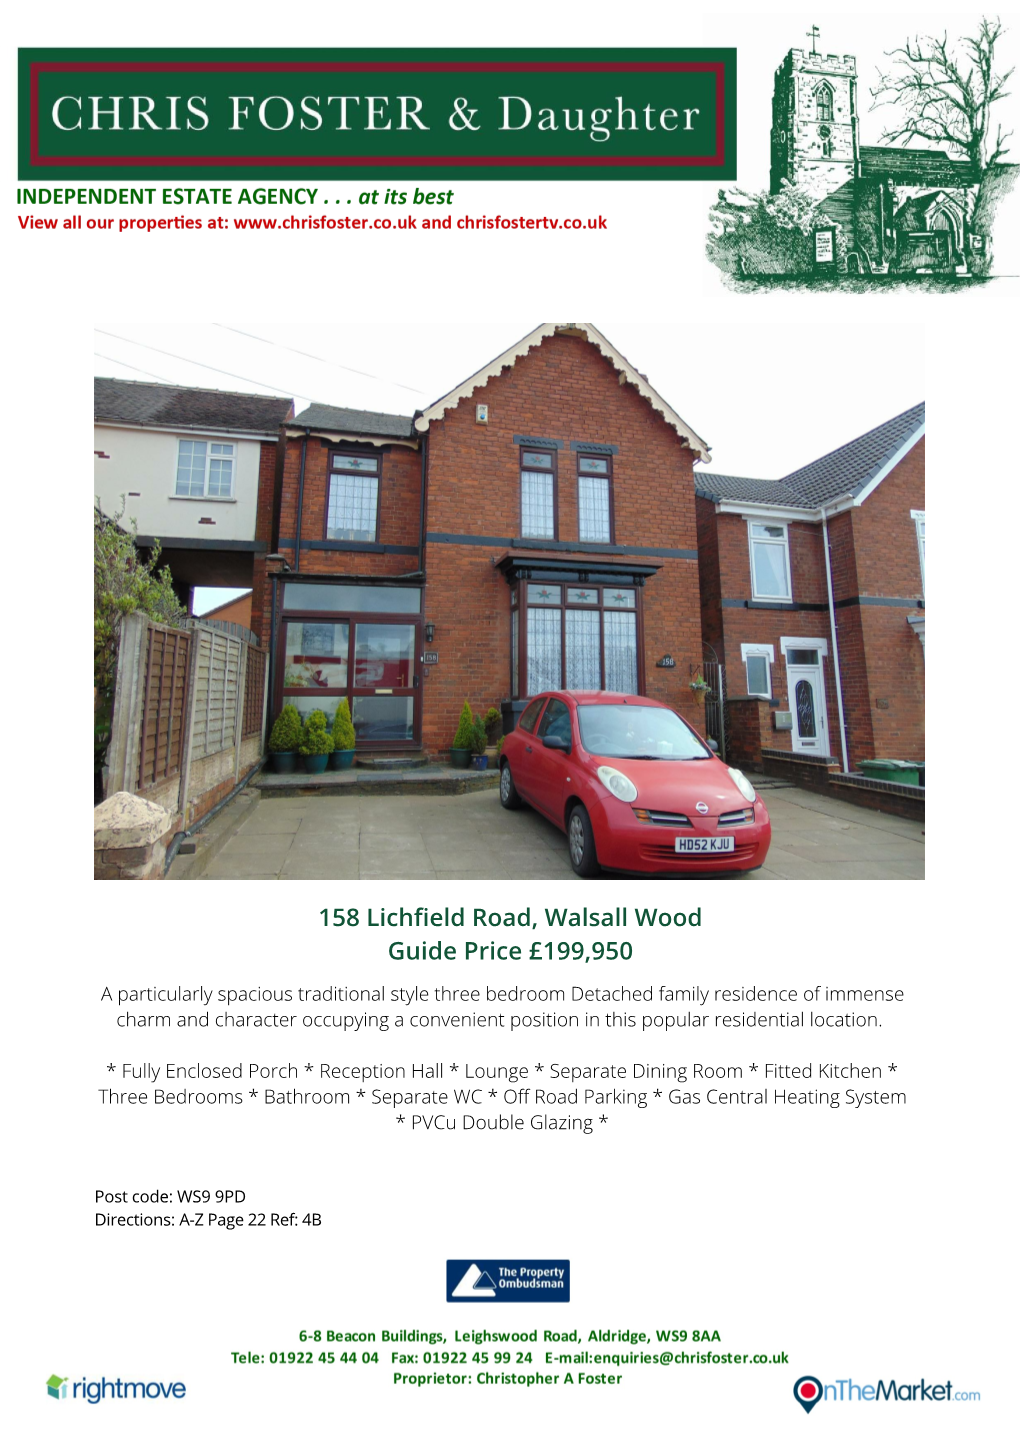 Lichfield Road, Walsall Wood Guide Price £199,950